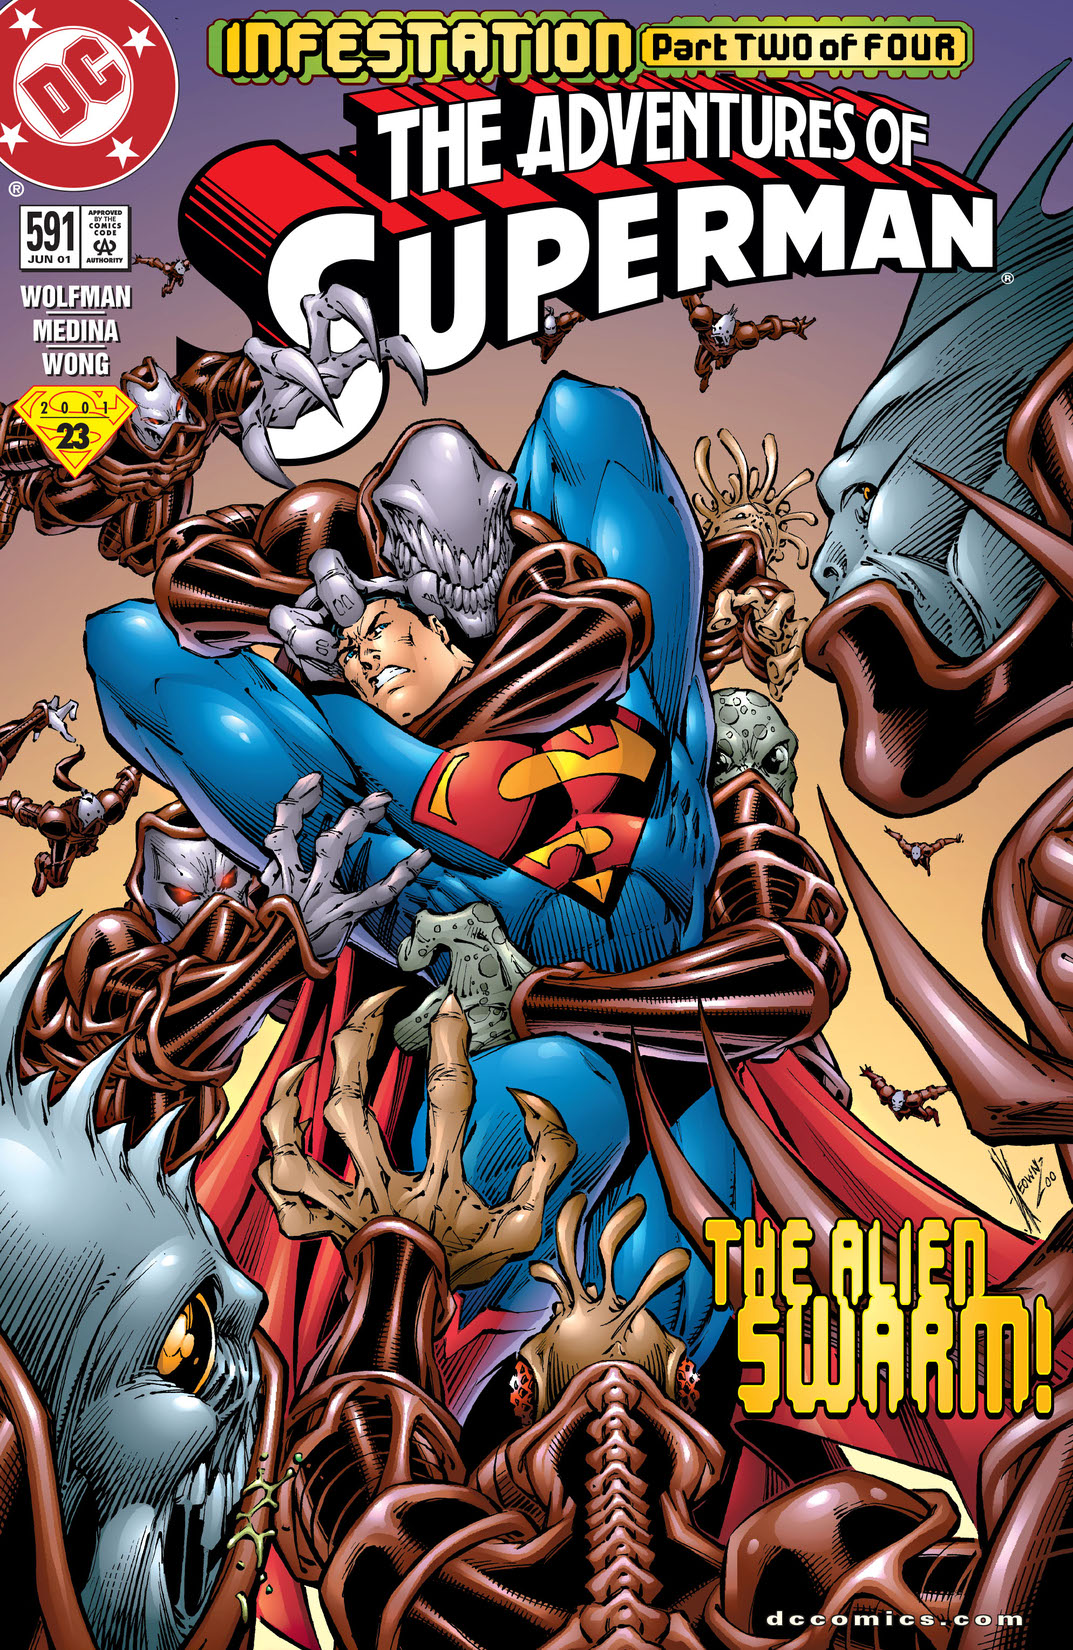 Adventures of Superman (1987-2006) #591 preview images